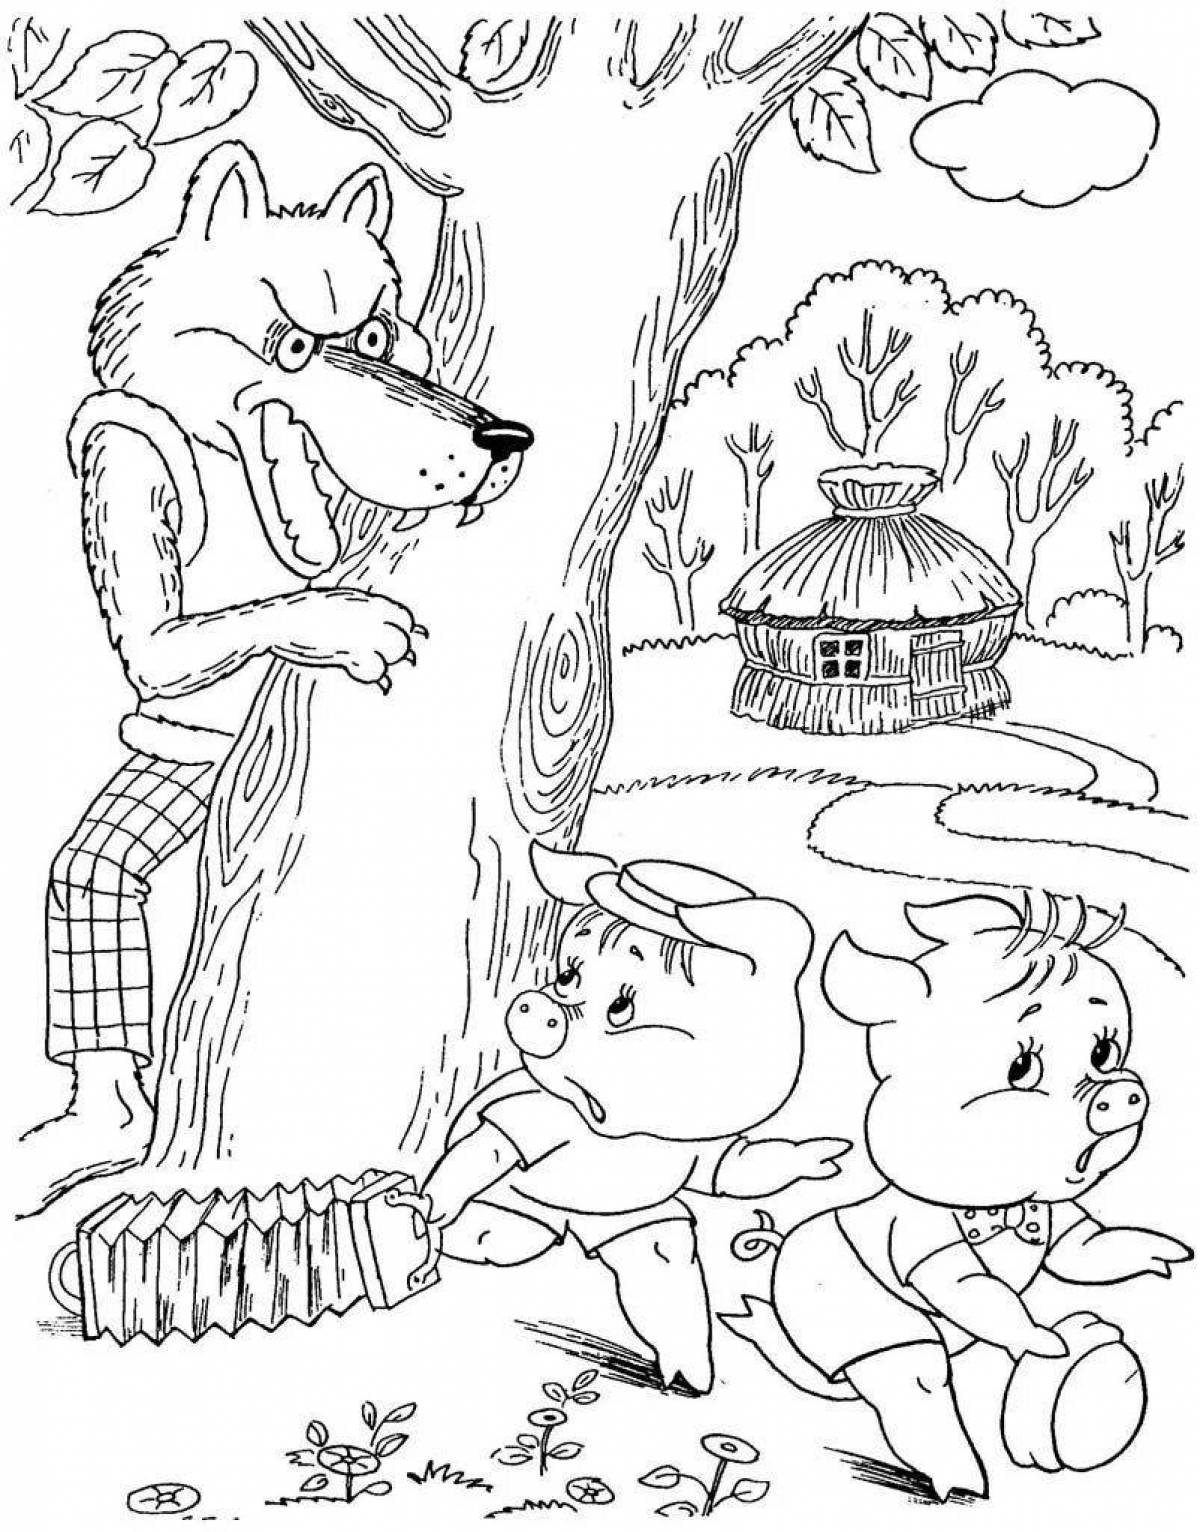 Cute three little pigs fairy tale coloring book